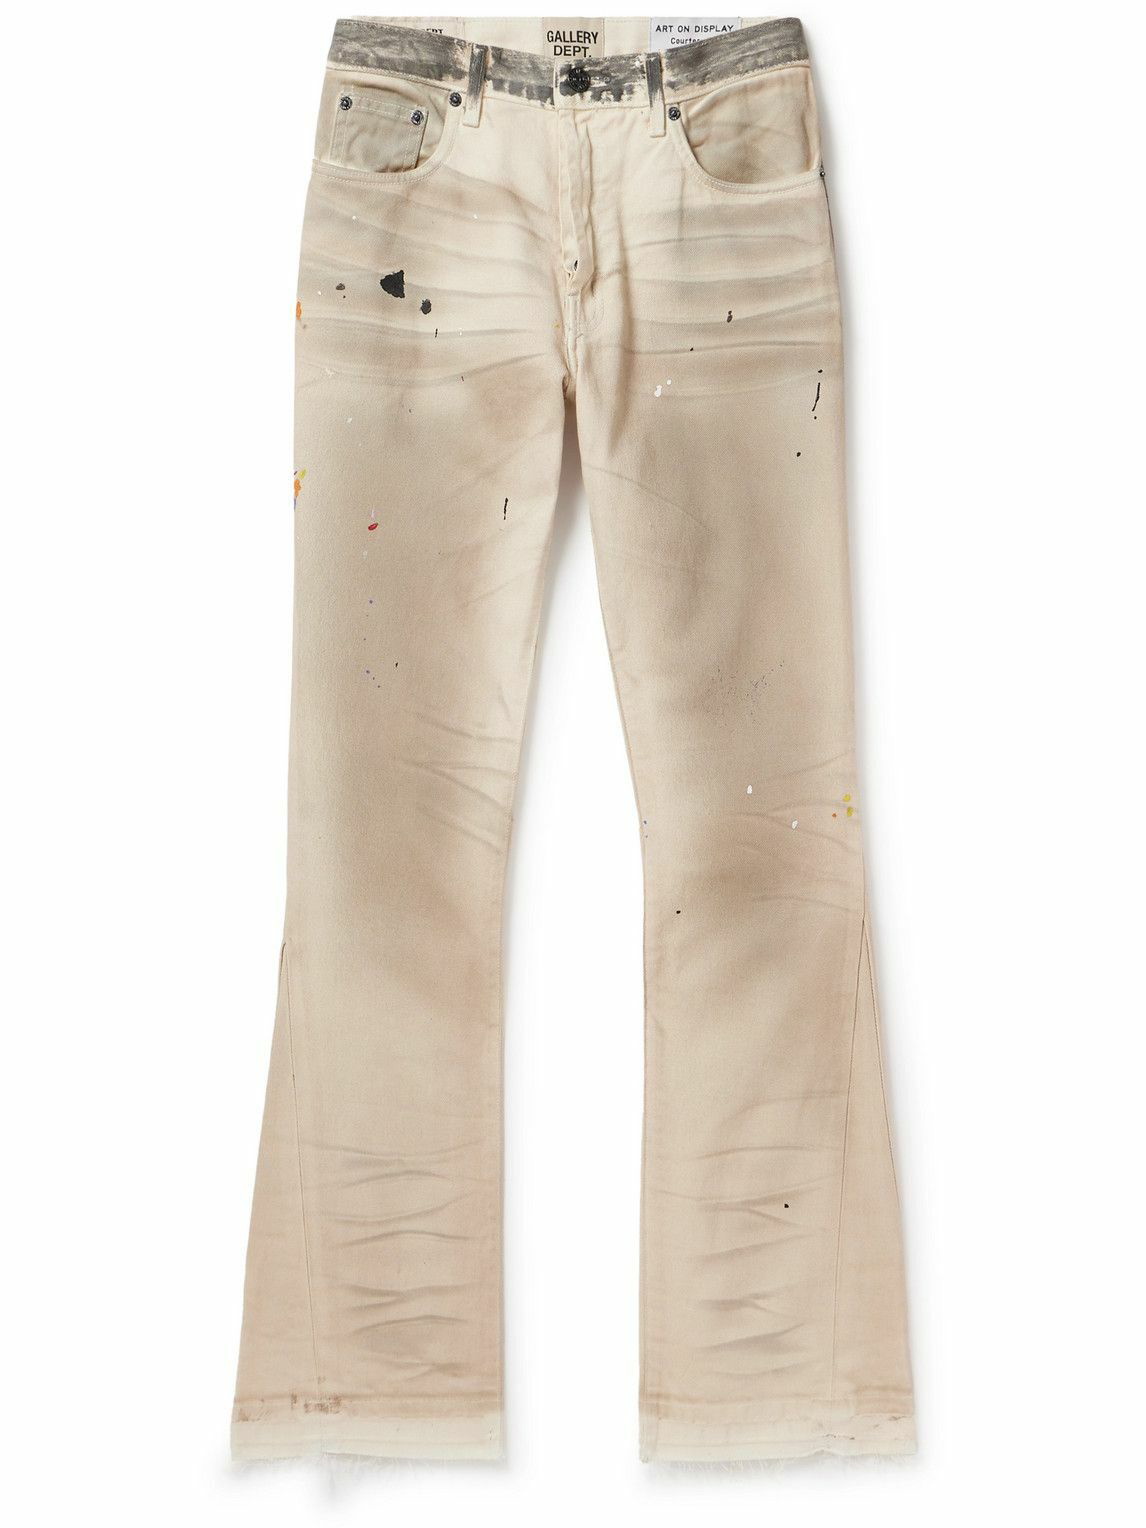 Gallery Dept. - Hollywood Flared Distressed Paint-Splattered Jeans ...